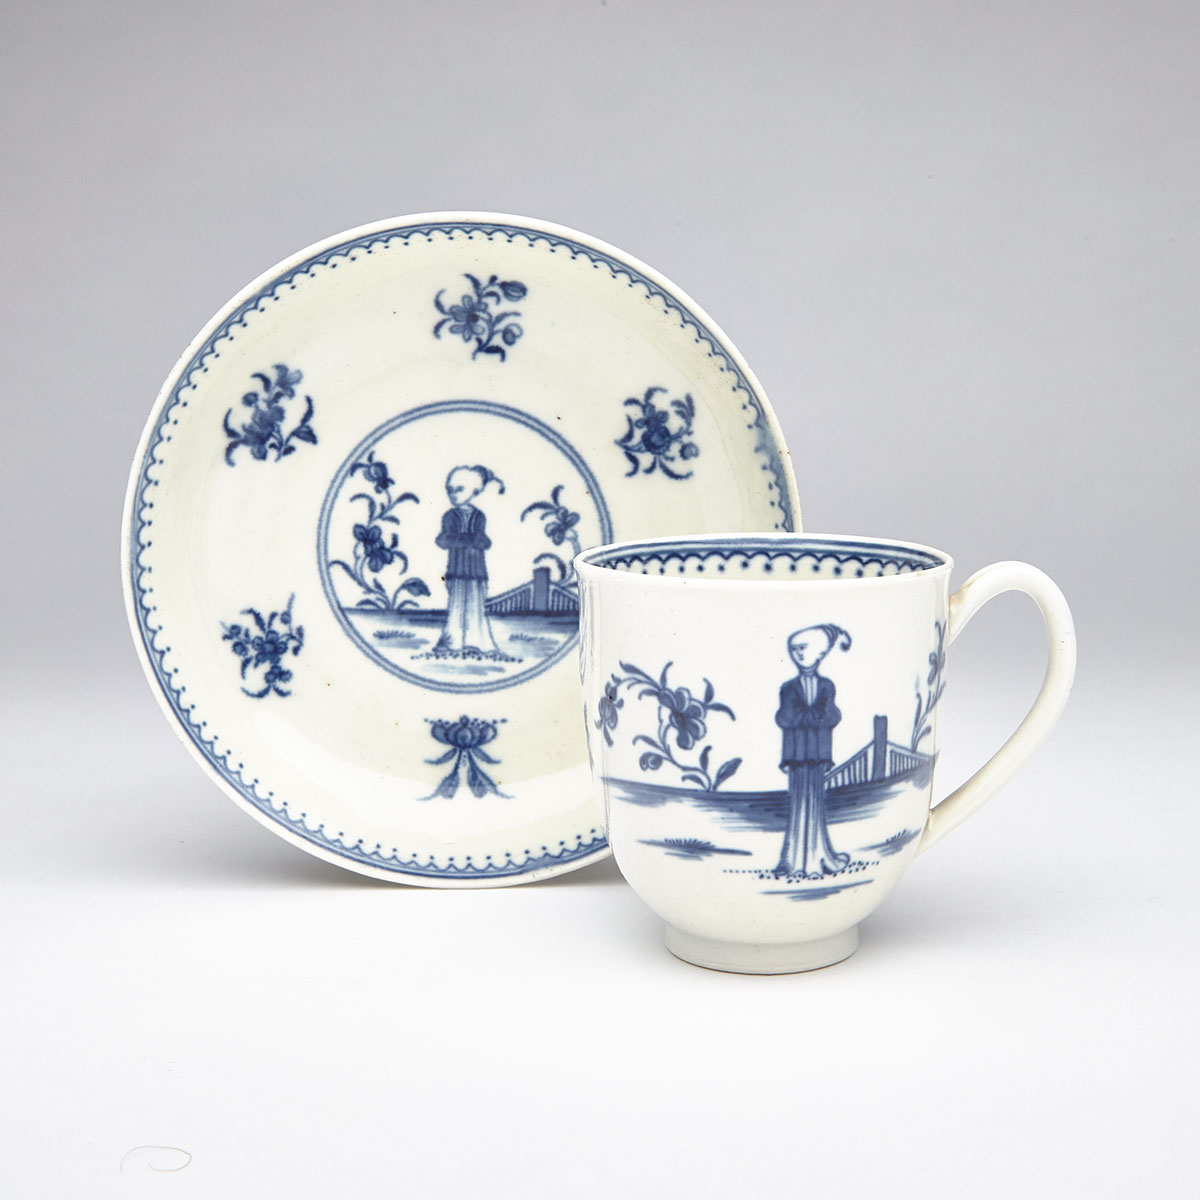 Worcester ‘Waiting Chinaman’ Coffee Cup and Saucer, c.1770-75